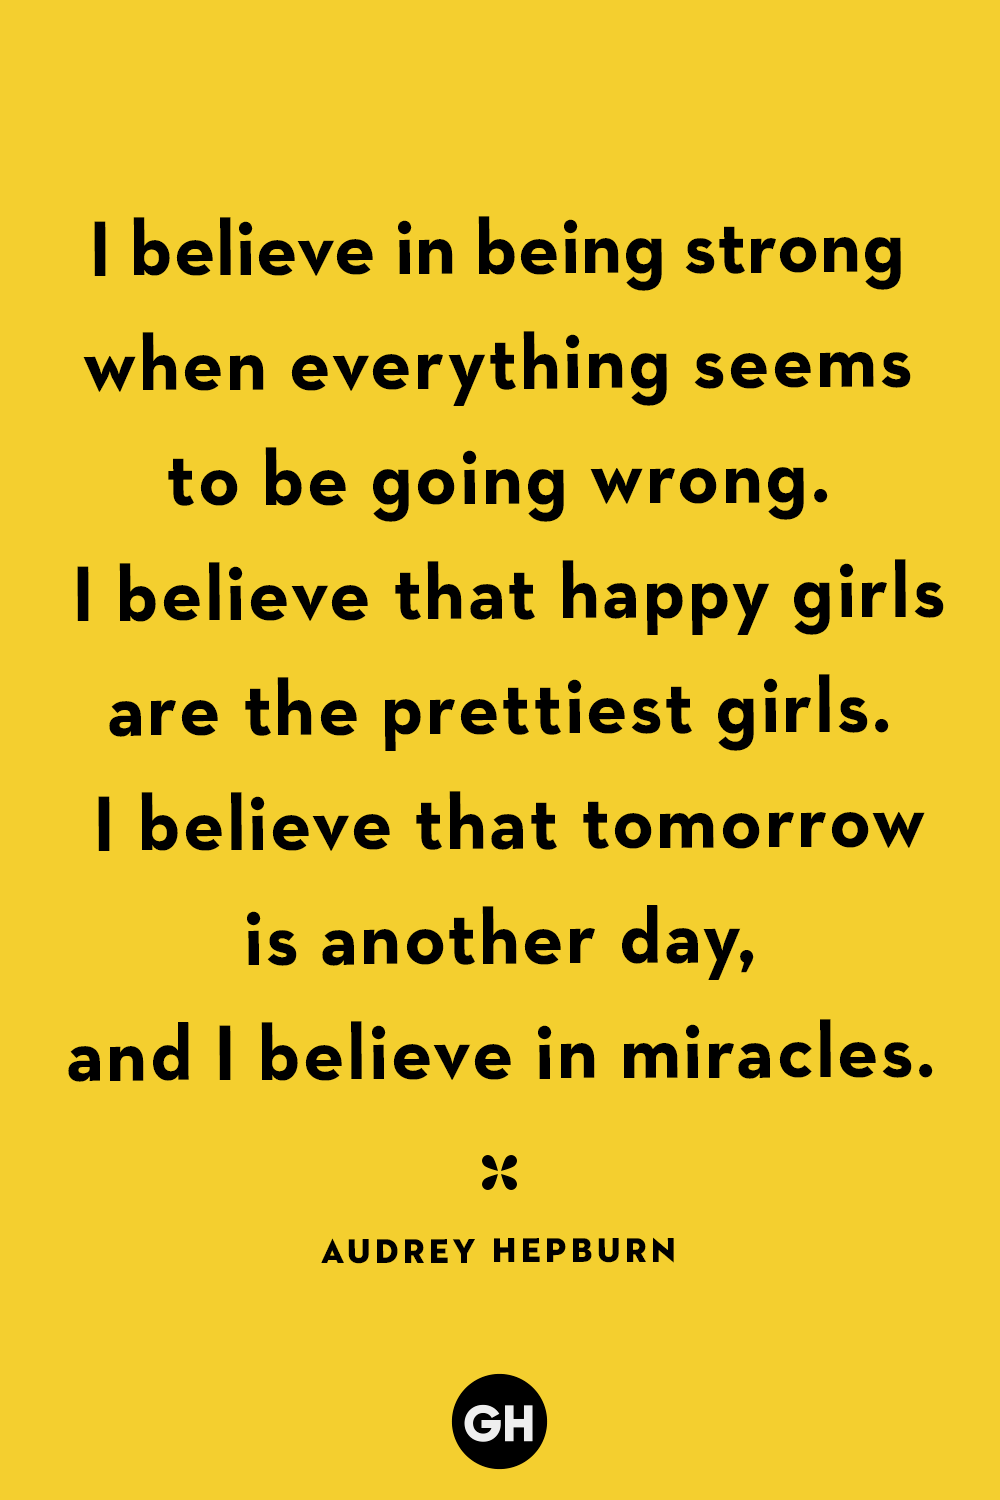 staying strong quotes for girls